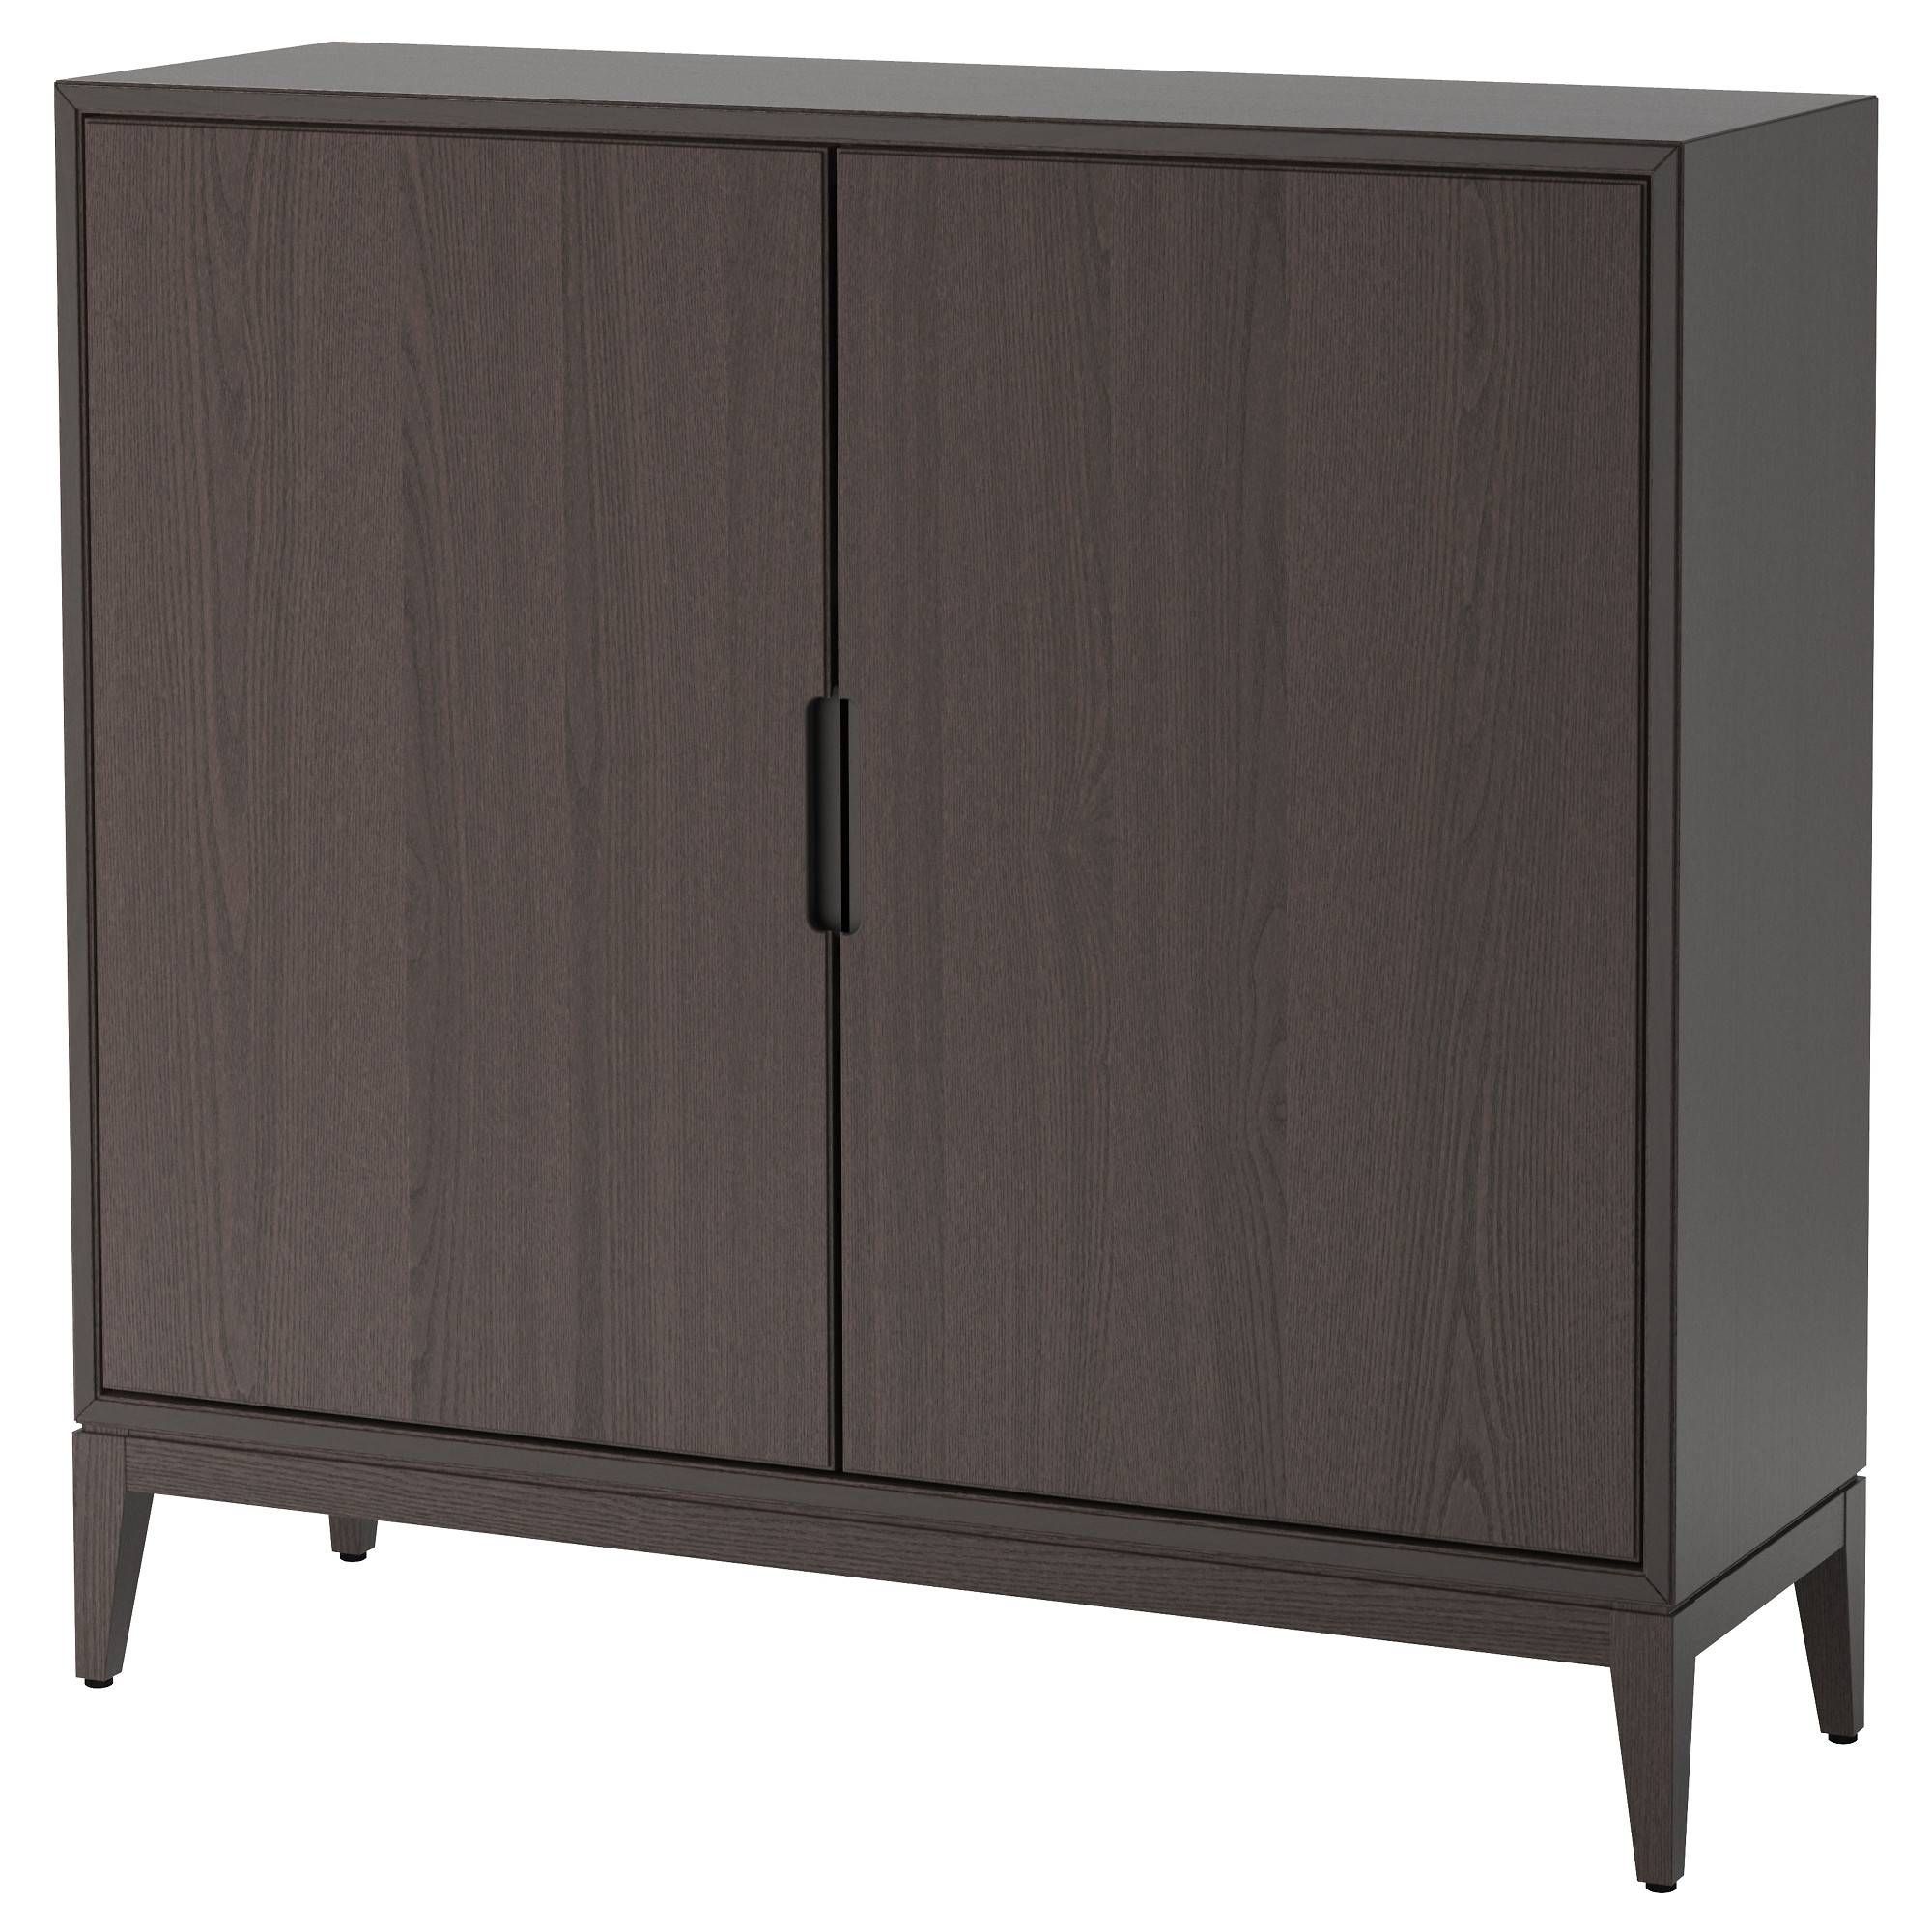 Cabinets & Sideboards – Ikea With Regard To Sideboards And Cabinets (View 2 of 15)